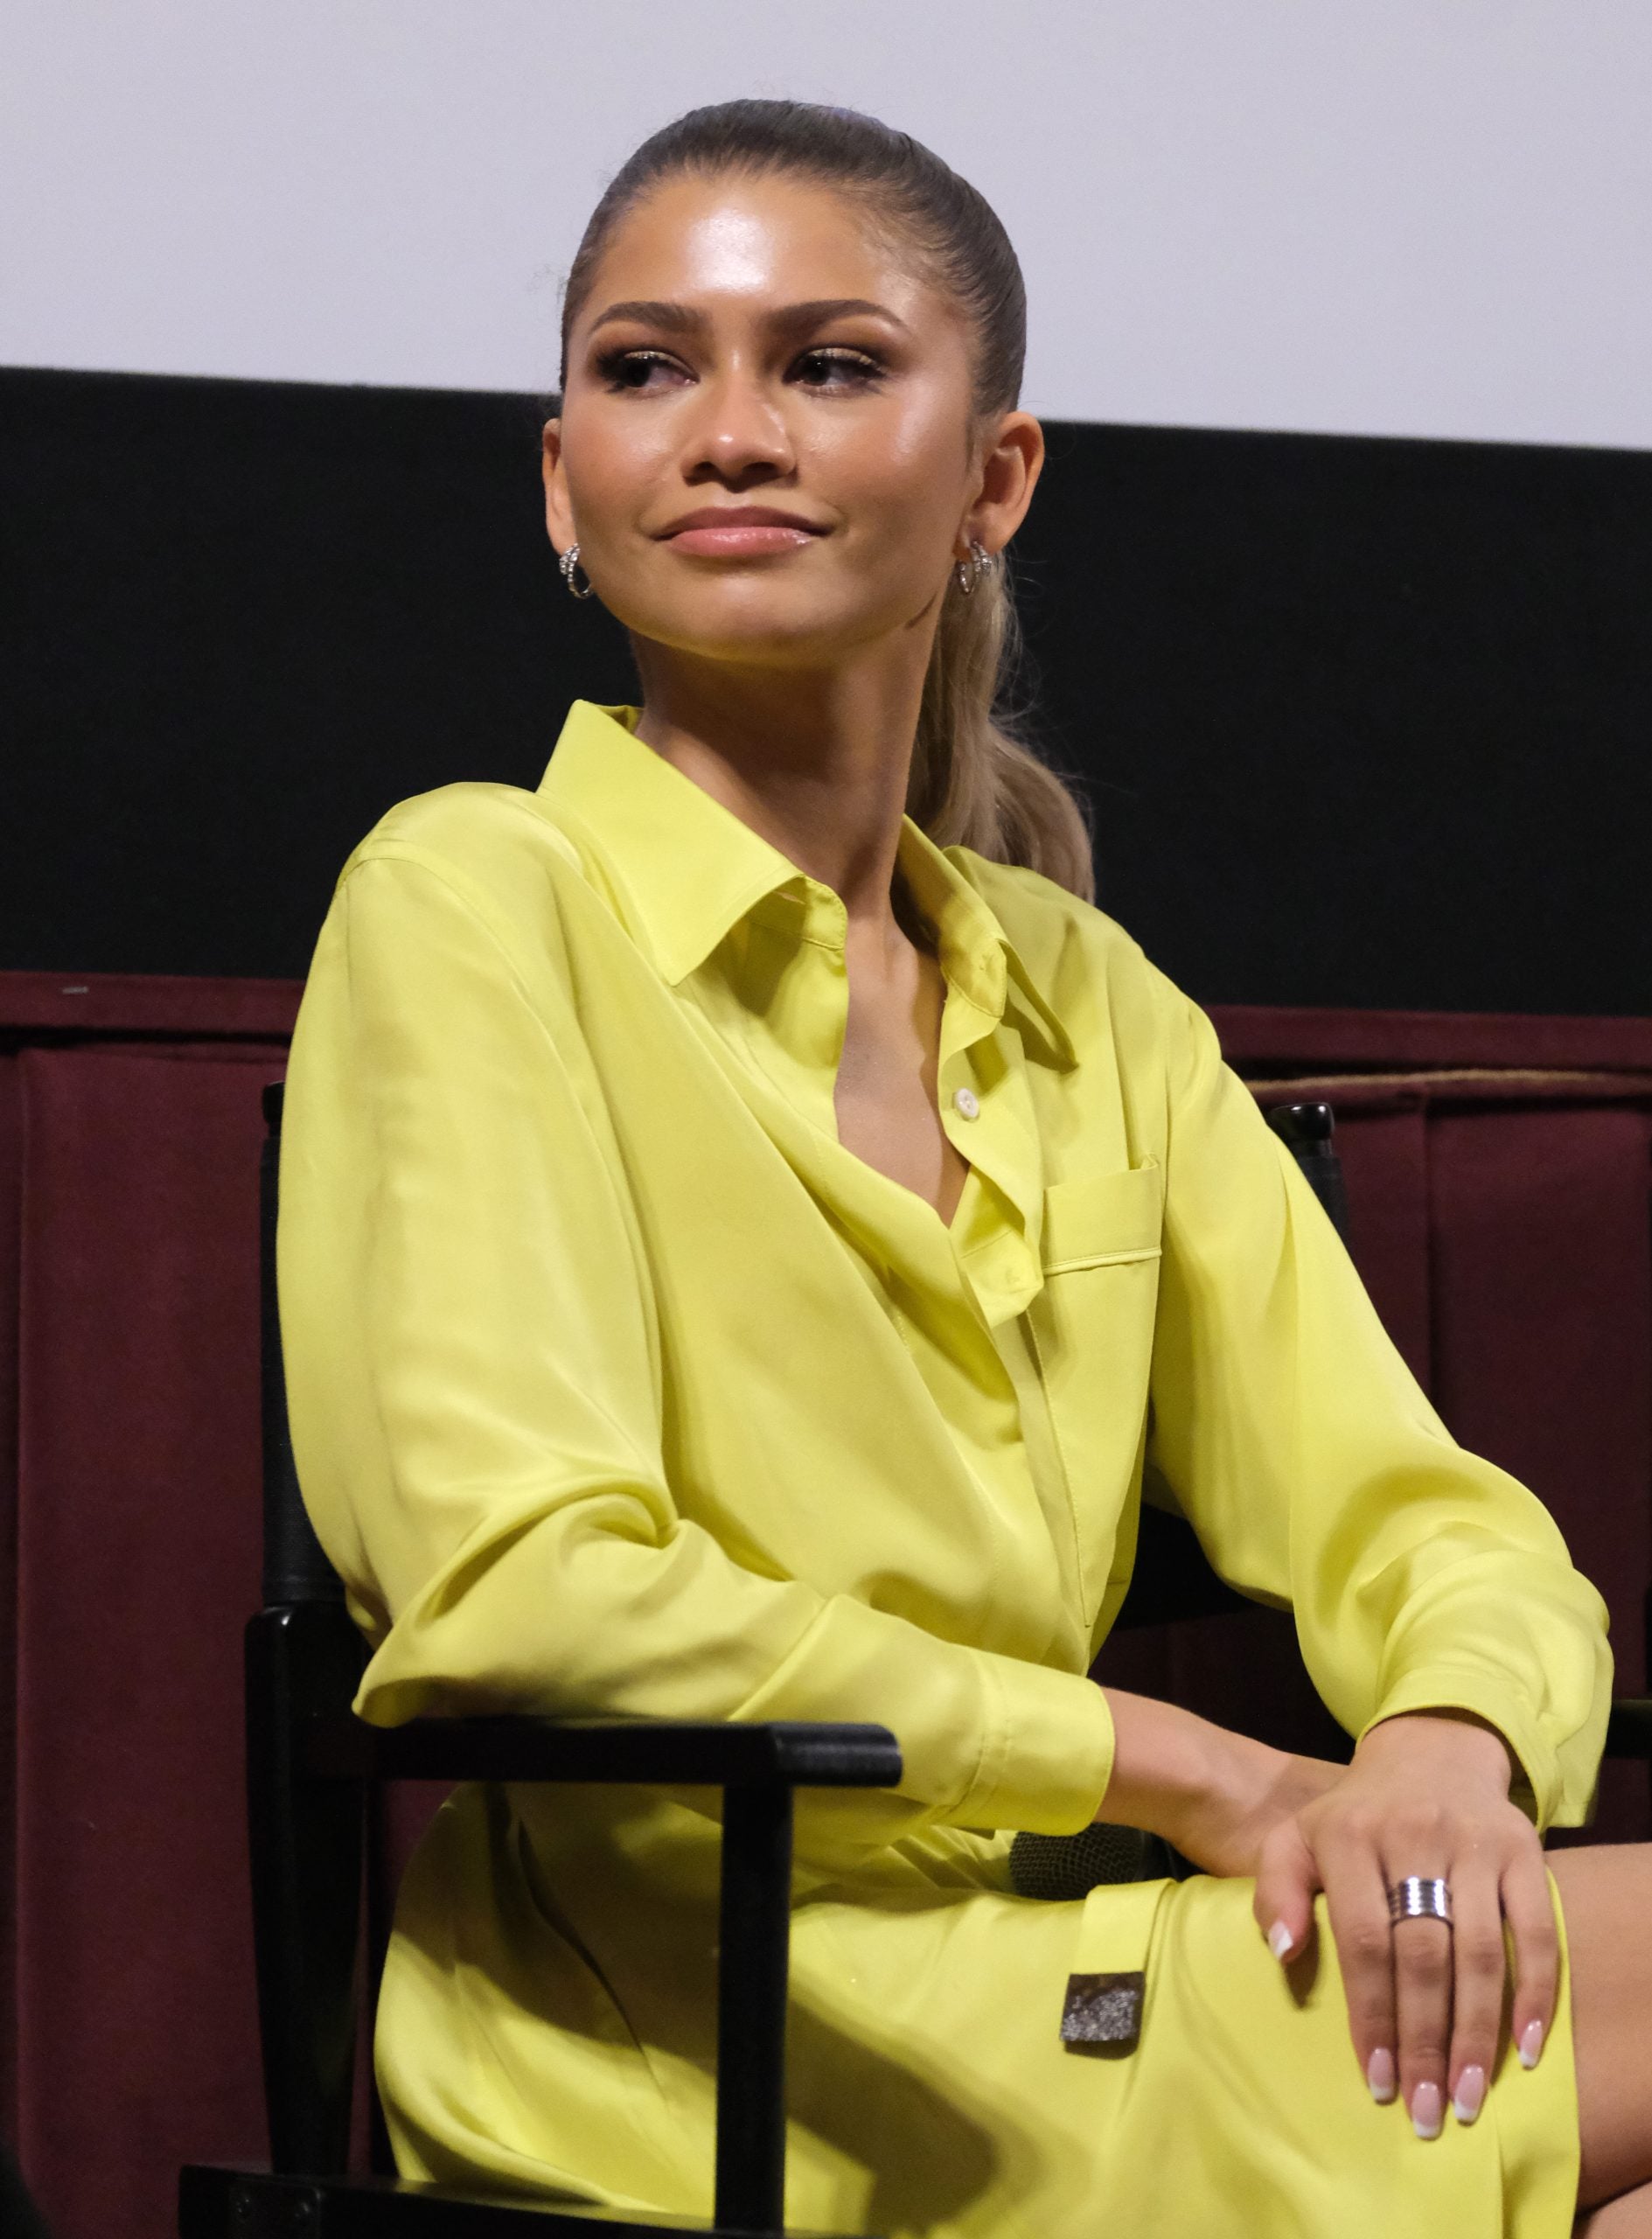 Zendaya's 'Challengers' Press Tour Looks Are Serving Old Hollywood Glamour